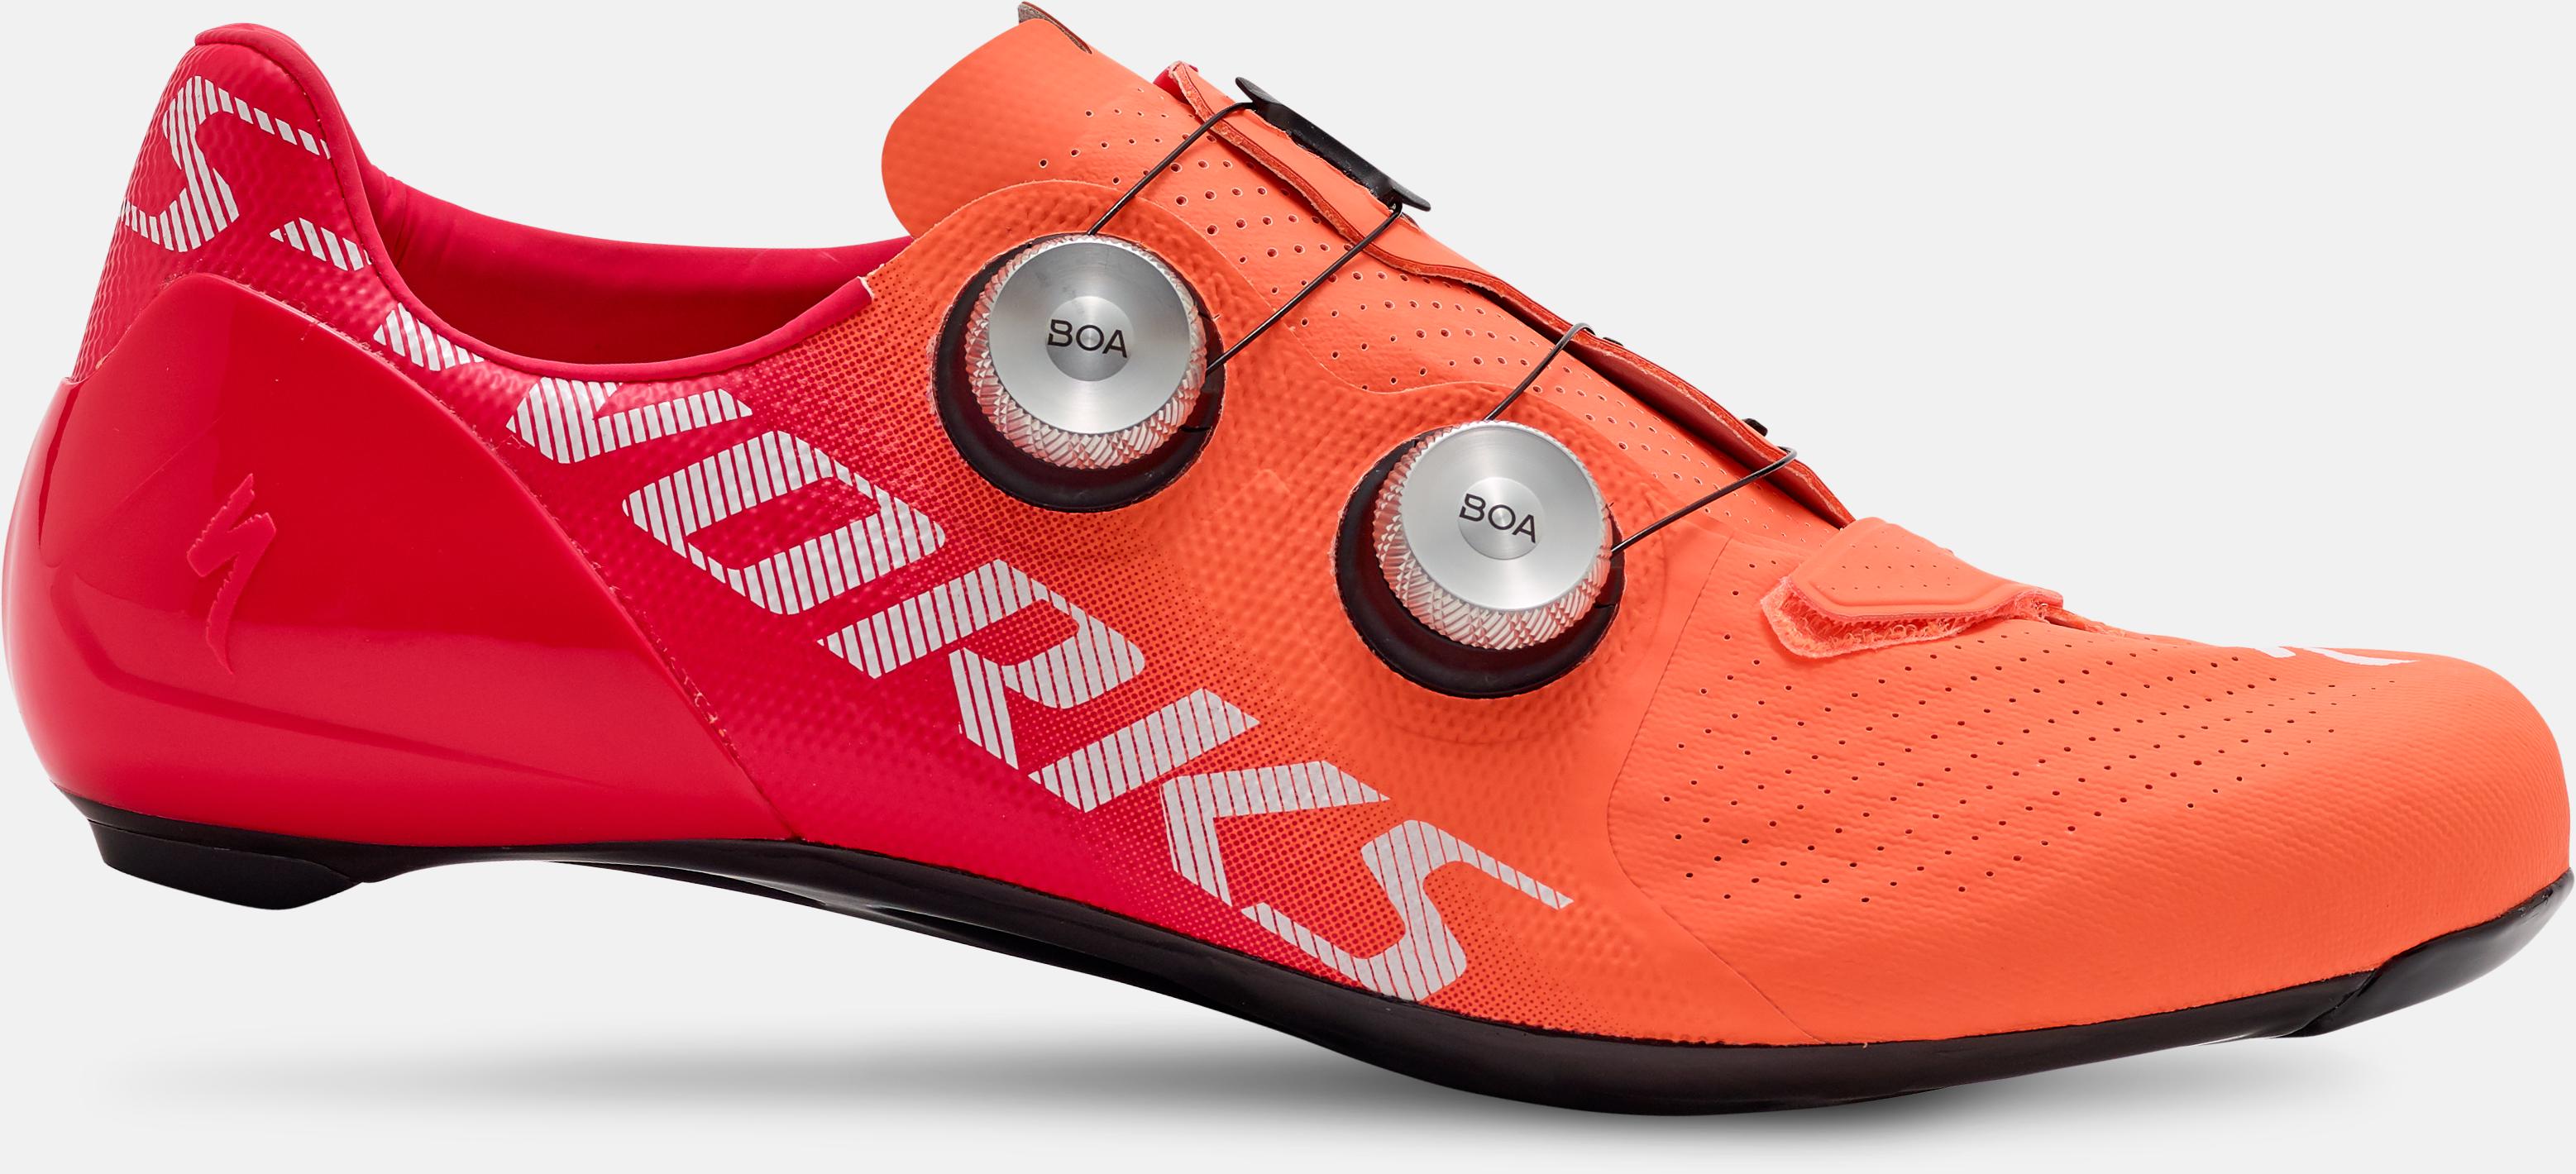 Specialized スペシャライズド S-Works 7 Road Shoes 61018-7239